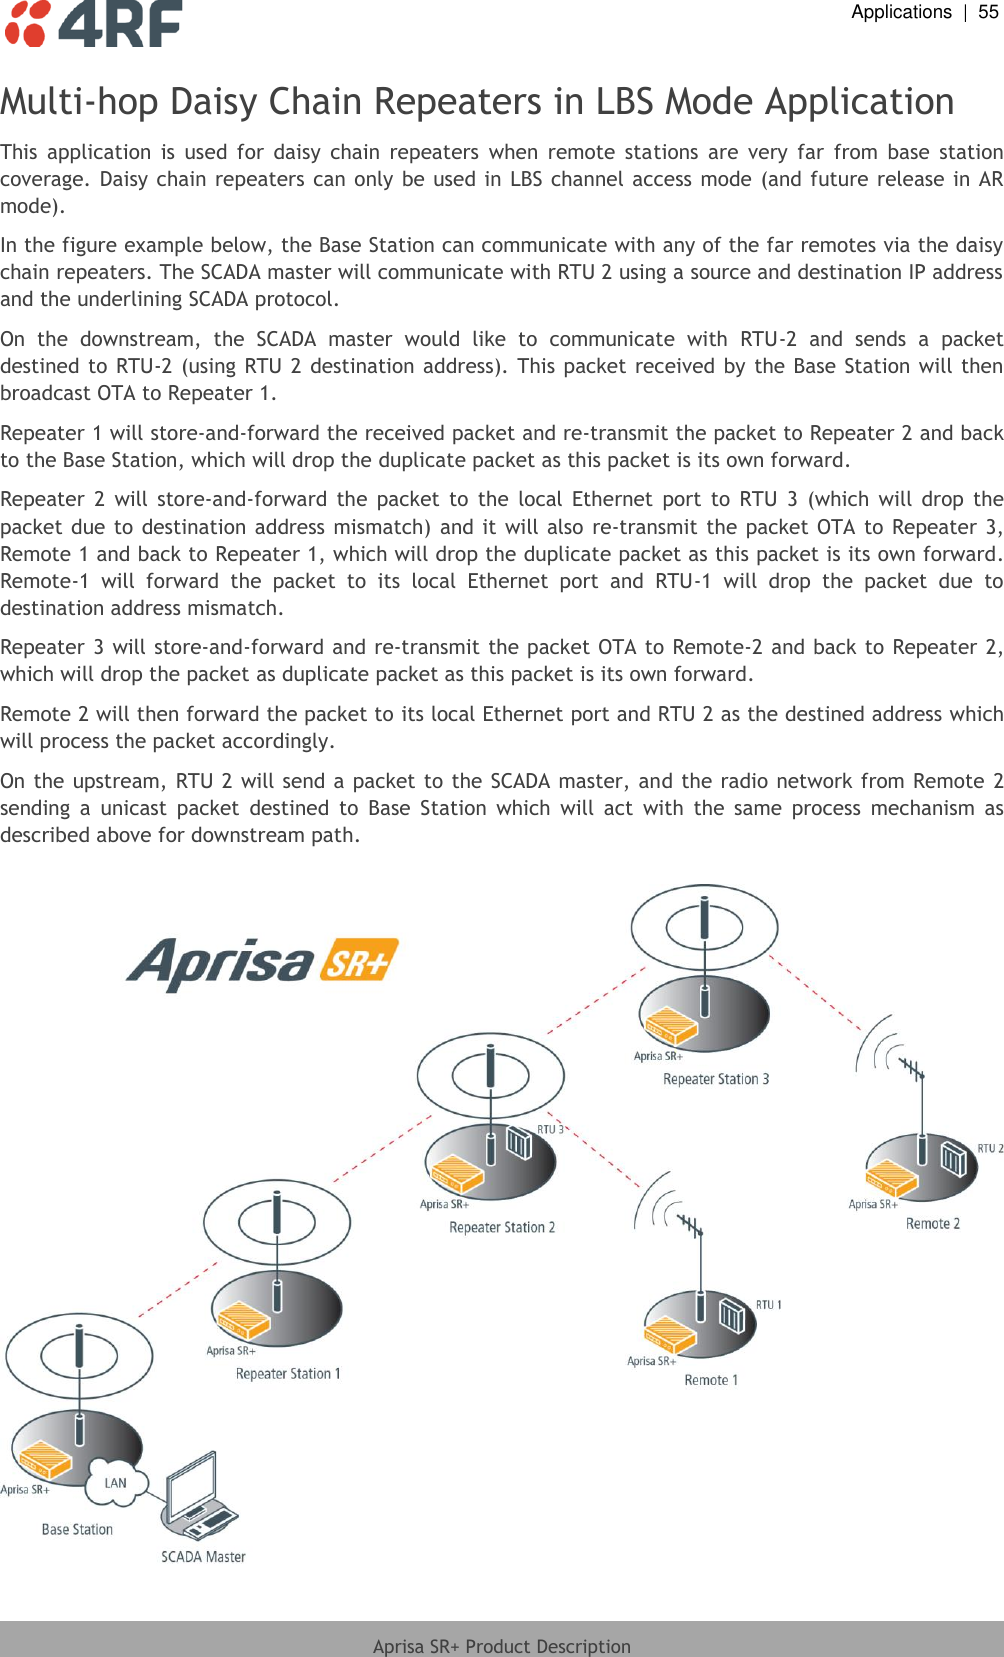  Applications  |  55  Aprisa SR+ Product Description  Multi-hop Daisy Chain Repeaters in LBS Mode Application This  application  is  used  for  daisy  chain  repeaters  when  remote  stations  are  very  far  from  base  station coverage. Daisy  chain repeaters  can  only be used in LBS channel access  mode (and future release in AR mode).  In the figure example below, the Base Station can communicate with any of the far remotes via the daisy chain repeaters. The SCADA master will communicate with RTU 2 using a source and destination IP address and the underlining SCADA protocol. On  the  downstream,  the  SCADA  master  would  like  to  communicate  with  RTU-2  and  sends  a  packet destined to RTU-2  (using RTU 2 destination address). This packet received  by the Base Station will then broadcast OTA to Repeater 1. Repeater 1 will store-and-forward the received packet and re-transmit the packet to Repeater 2 and back to the Base Station, which will drop the duplicate packet as this packet is its own forward. Repeater  2  will  store-and-forward  the  packet  to  the  local  Ethernet  port  to  RTU  3  (which  will  drop  the packet due to destination  address  mismatch)  and it will also re-transmit the  packet OTA to Repeater  3, Remote 1 and back to Repeater 1, which will drop the duplicate packet as this packet is its own forward. Remote-1  will  forward  the  packet  to  its  local  Ethernet  port  and  RTU-1  will  drop  the  packet  due  to destination address mismatch. Repeater 3 will store-and-forward and re-transmit the packet OTA to Remote-2 and back to Repeater 2, which will drop the packet as duplicate packet as this packet is its own forward.  Remote 2 will then forward the packet to its local Ethernet port and RTU 2 as the destined address which will process the packet accordingly. On the upstream, RTU 2 will send a packet to the SCADA master, and the radio network from Remote 2 sending  a  unicast  packet  destined  to  Base  Station  which  will  act  with  the  same  process  mechanism  as described above for downstream path.   